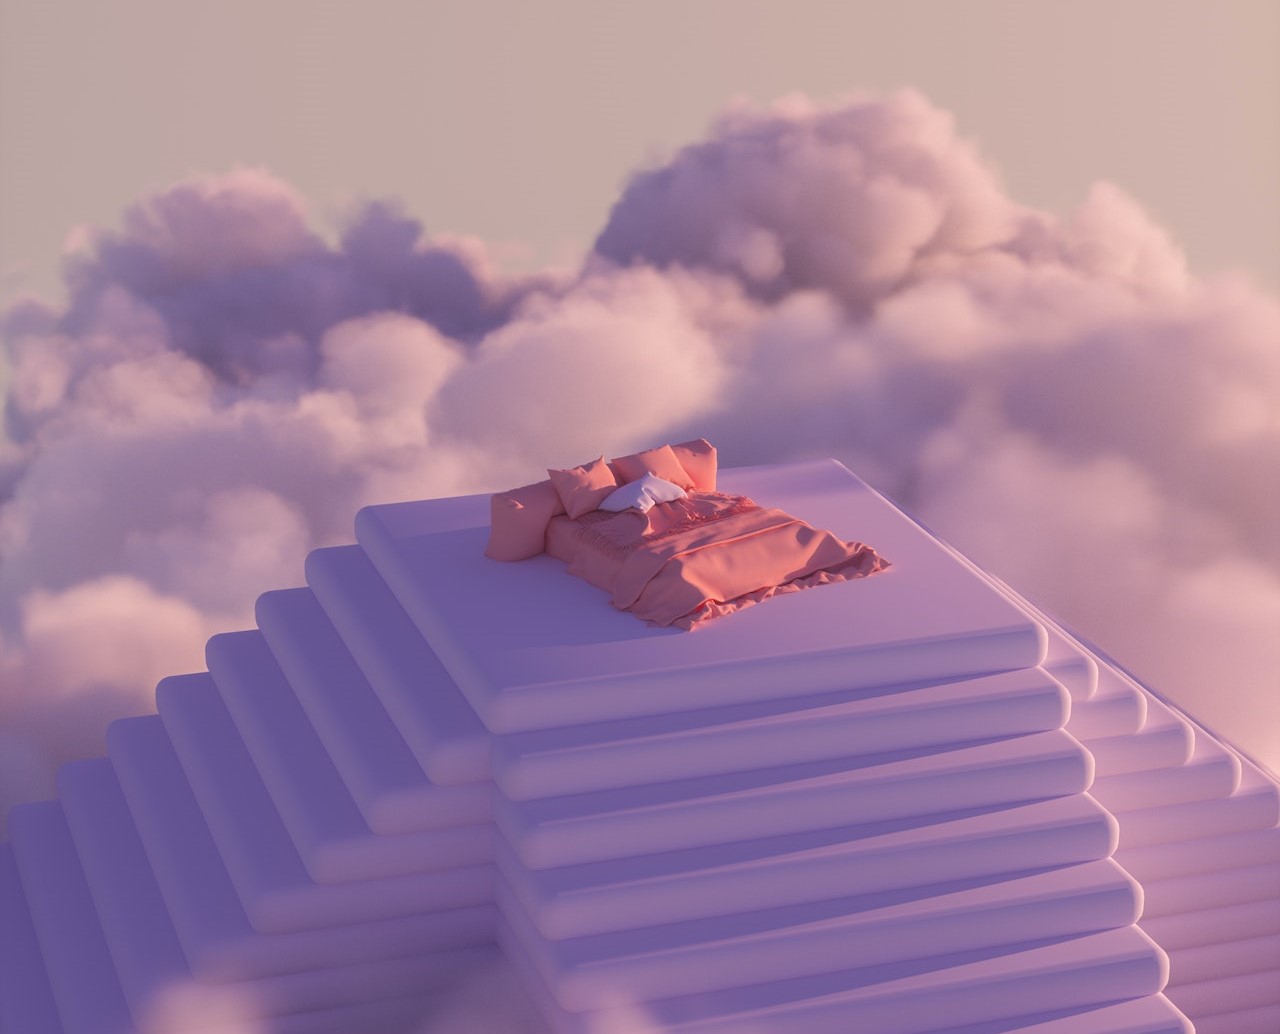 graphic of bed atop a pyramid of stairs in a cloudy sky